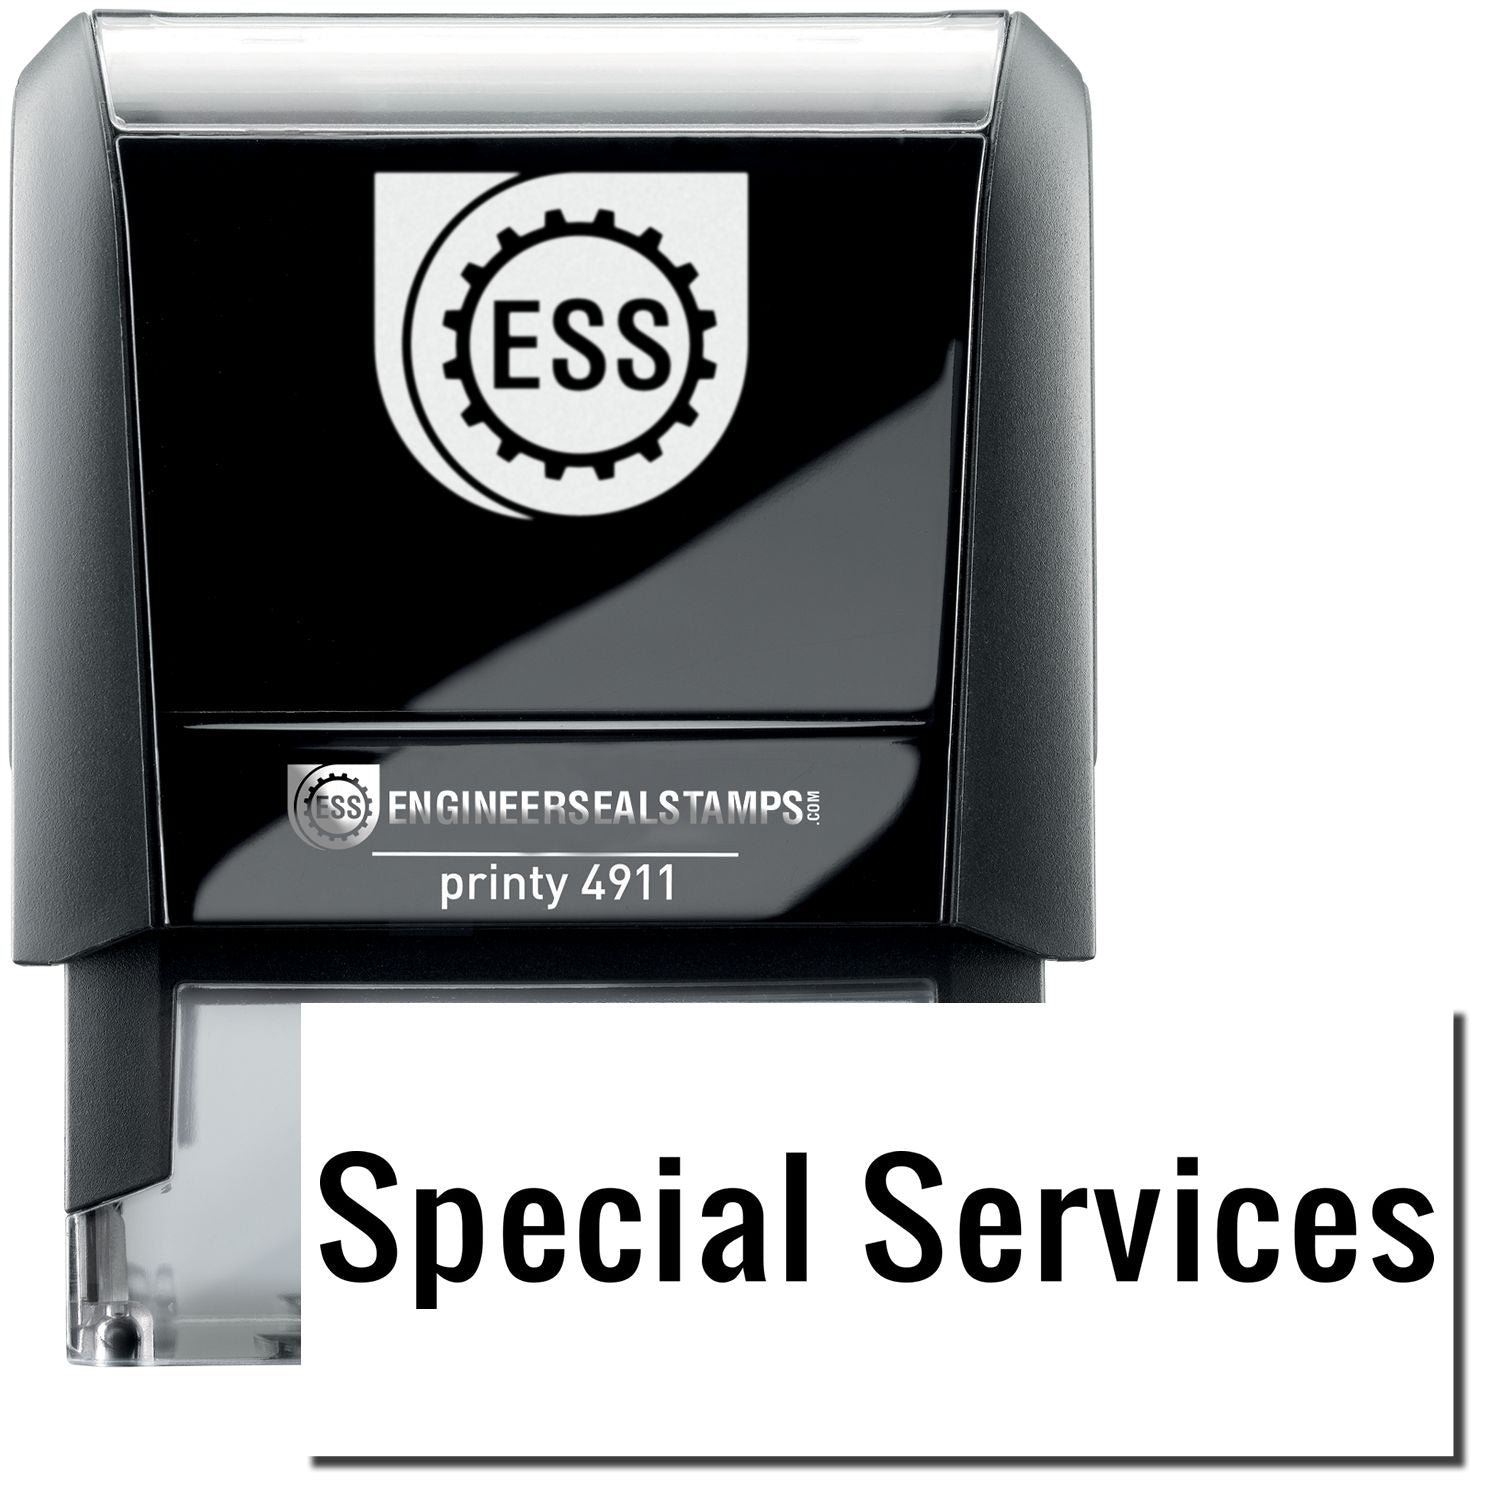 A self-inking stamp with a stamped image showing how the text "Special Services" is displayed after stamping.